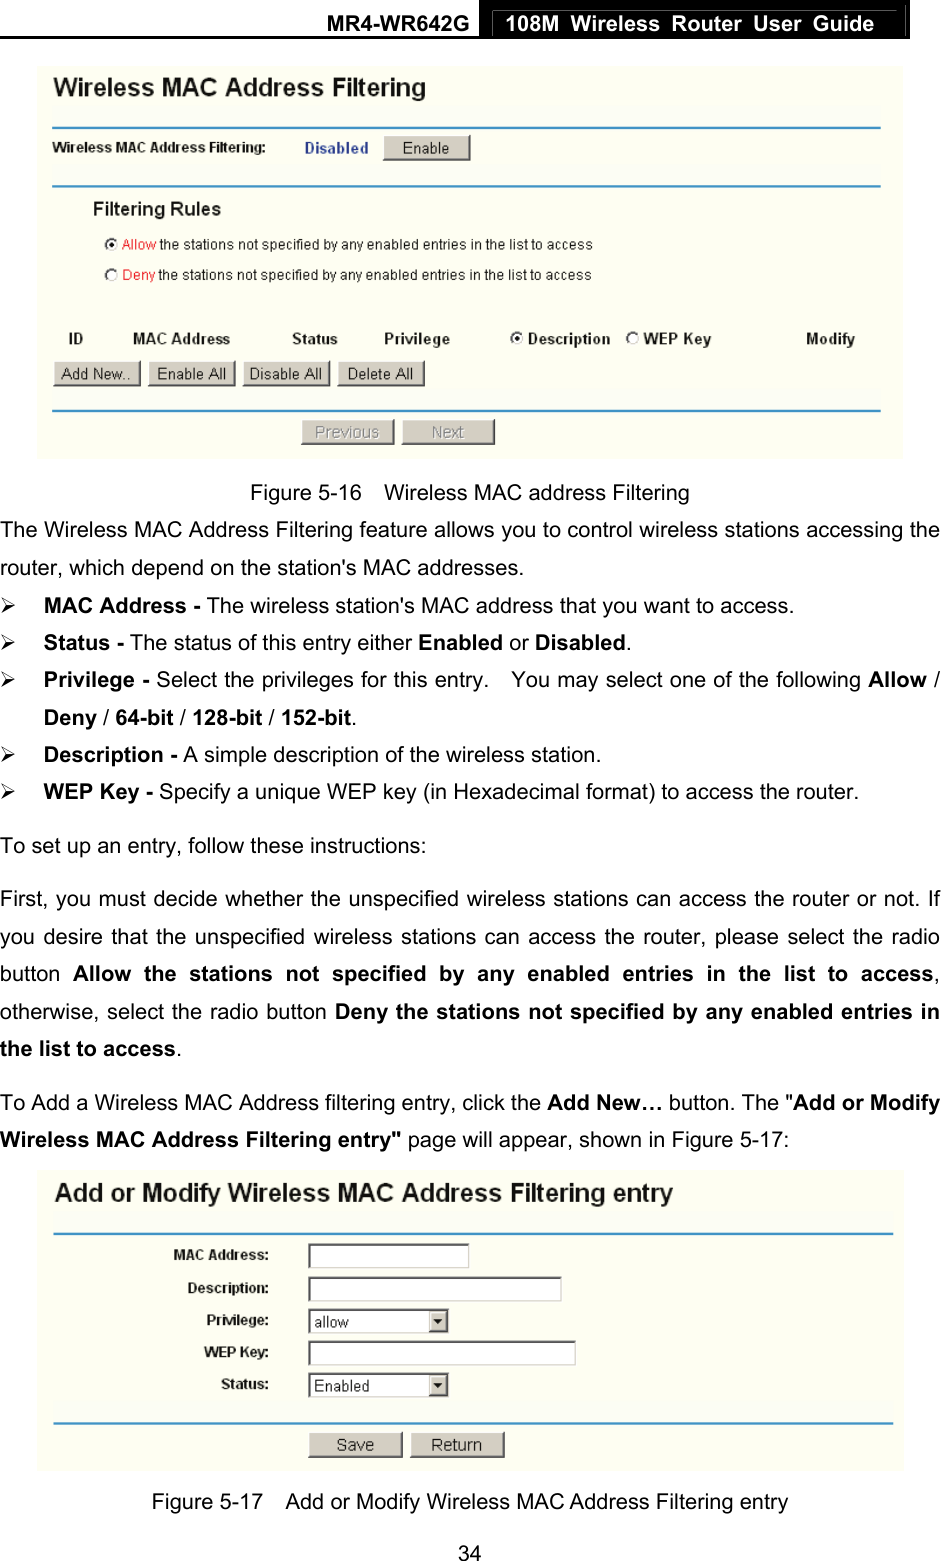 MR4-WR642G 108M Wireless Router User Guide   34 Figure 5-16    Wireless MAC address Filtering The Wireless MAC Address Filtering feature allows you to control wireless stations accessing the router, which depend on the station&apos;s MAC addresses.   ¾ MAC Address - The wireless station&apos;s MAC address that you want to access.   ¾ Status - The status of this entry either Enabled or Disabled. ¾ Privilege - Select the privileges for this entry.    You may select one of the following Allow / Deny / 64-bit / 128-bit / 152-bit.  ¾ Description - A simple description of the wireless station.   ¾ WEP Key - Specify a unique WEP key (in Hexadecimal format) to access the router.   To set up an entry, follow these instructions:   First, you must decide whether the unspecified wireless stations can access the router or not. If you desire that the unspecified wireless stations can access the router, please select the radio button  Allow the stations not specified by any enabled entries in the list to access, otherwise, select the radio button Deny the stations not specified by any enabled entries in the list to access. To Add a Wireless MAC Address filtering entry, click the Add New… button. The &quot;Add or Modify Wireless MAC Address Filtering entry&quot; page will appear, shown in Figure 5-17:  Figure 5-17    Add or Modify Wireless MAC Address Filtering entry 